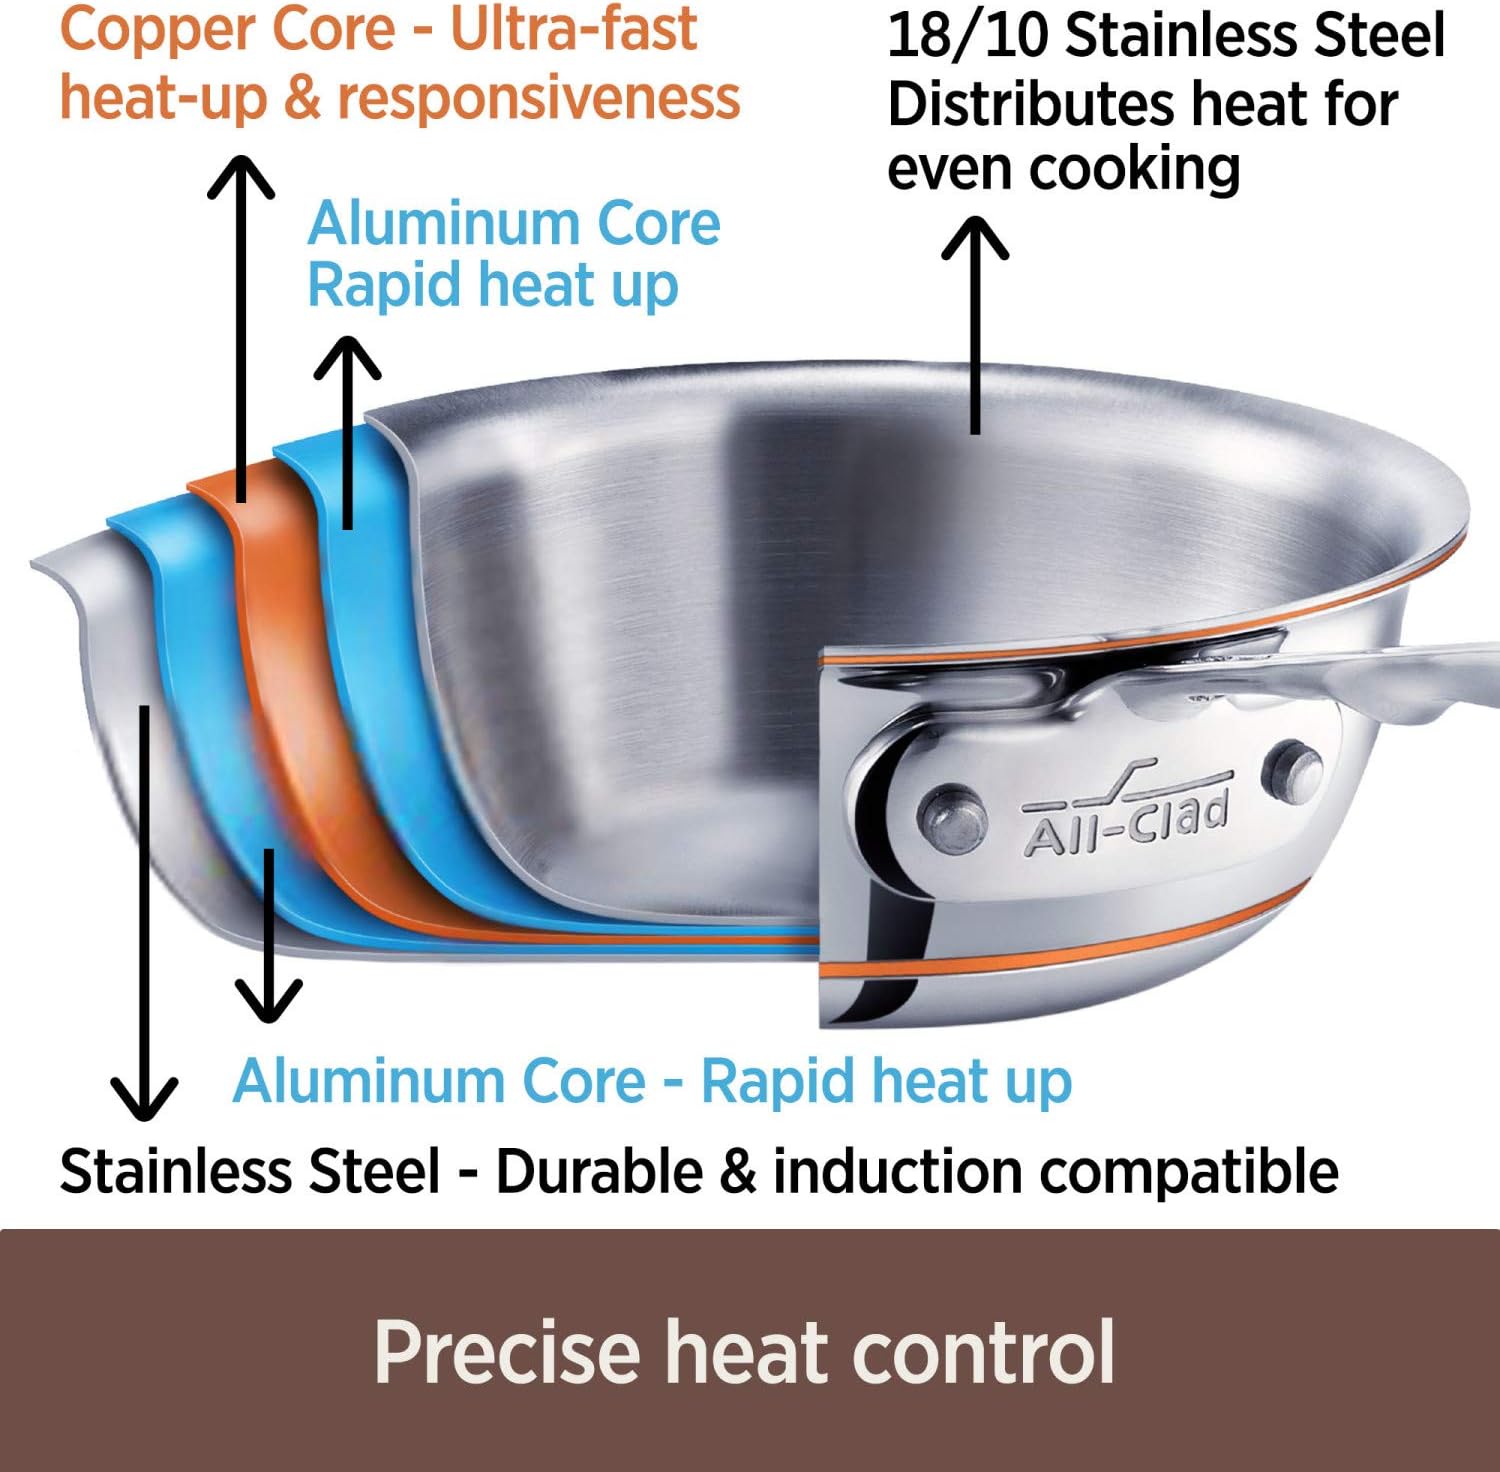 All-Clad Copper Core 5-Ply Stainless Steel Sauté Pan with Steel Lid 5 Quart  Induction Oven Broil Safe 600F Pots and Pans, Cookware